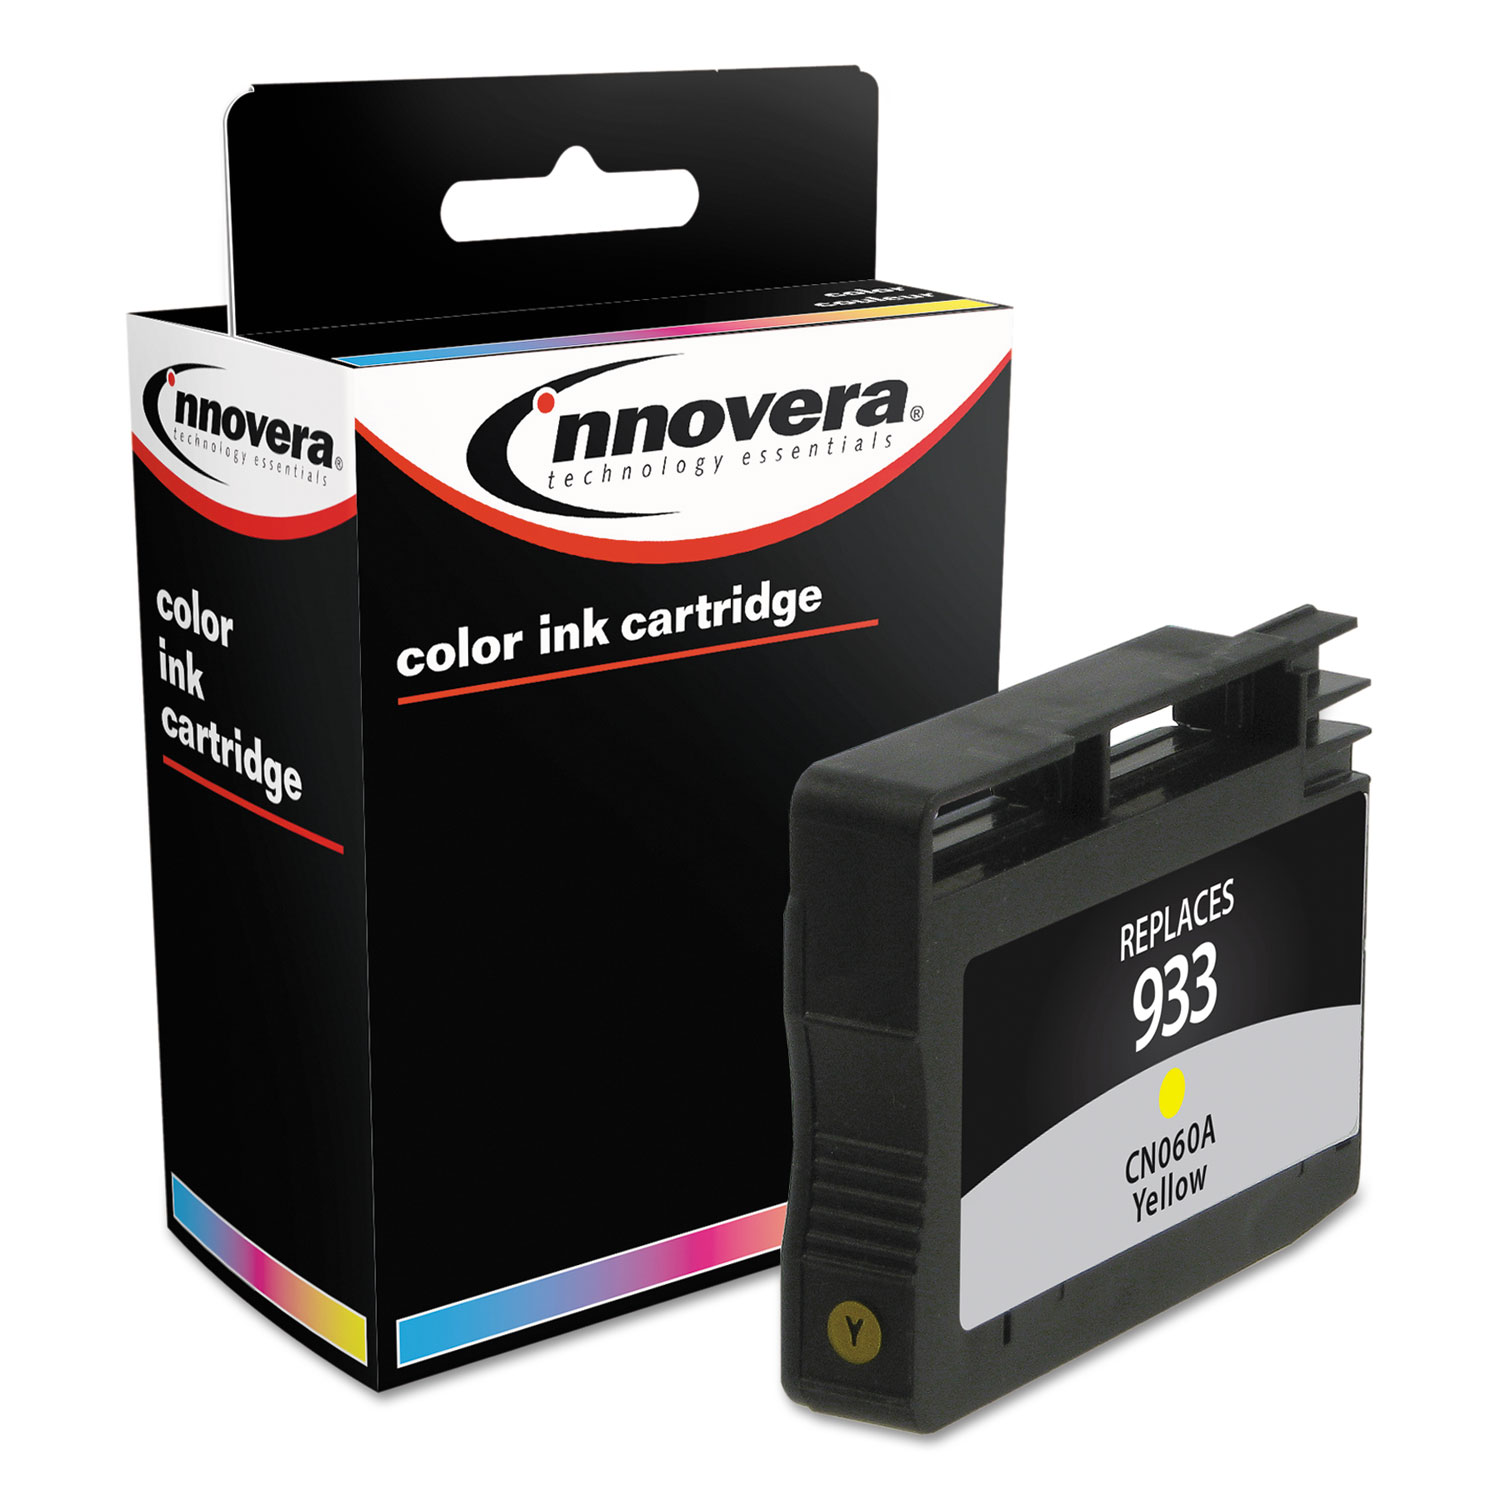  Innovera IVR933Y Remanufactured CN060A (933) Ink, 330 Page-Yield, Yellow (IVR933Y) 